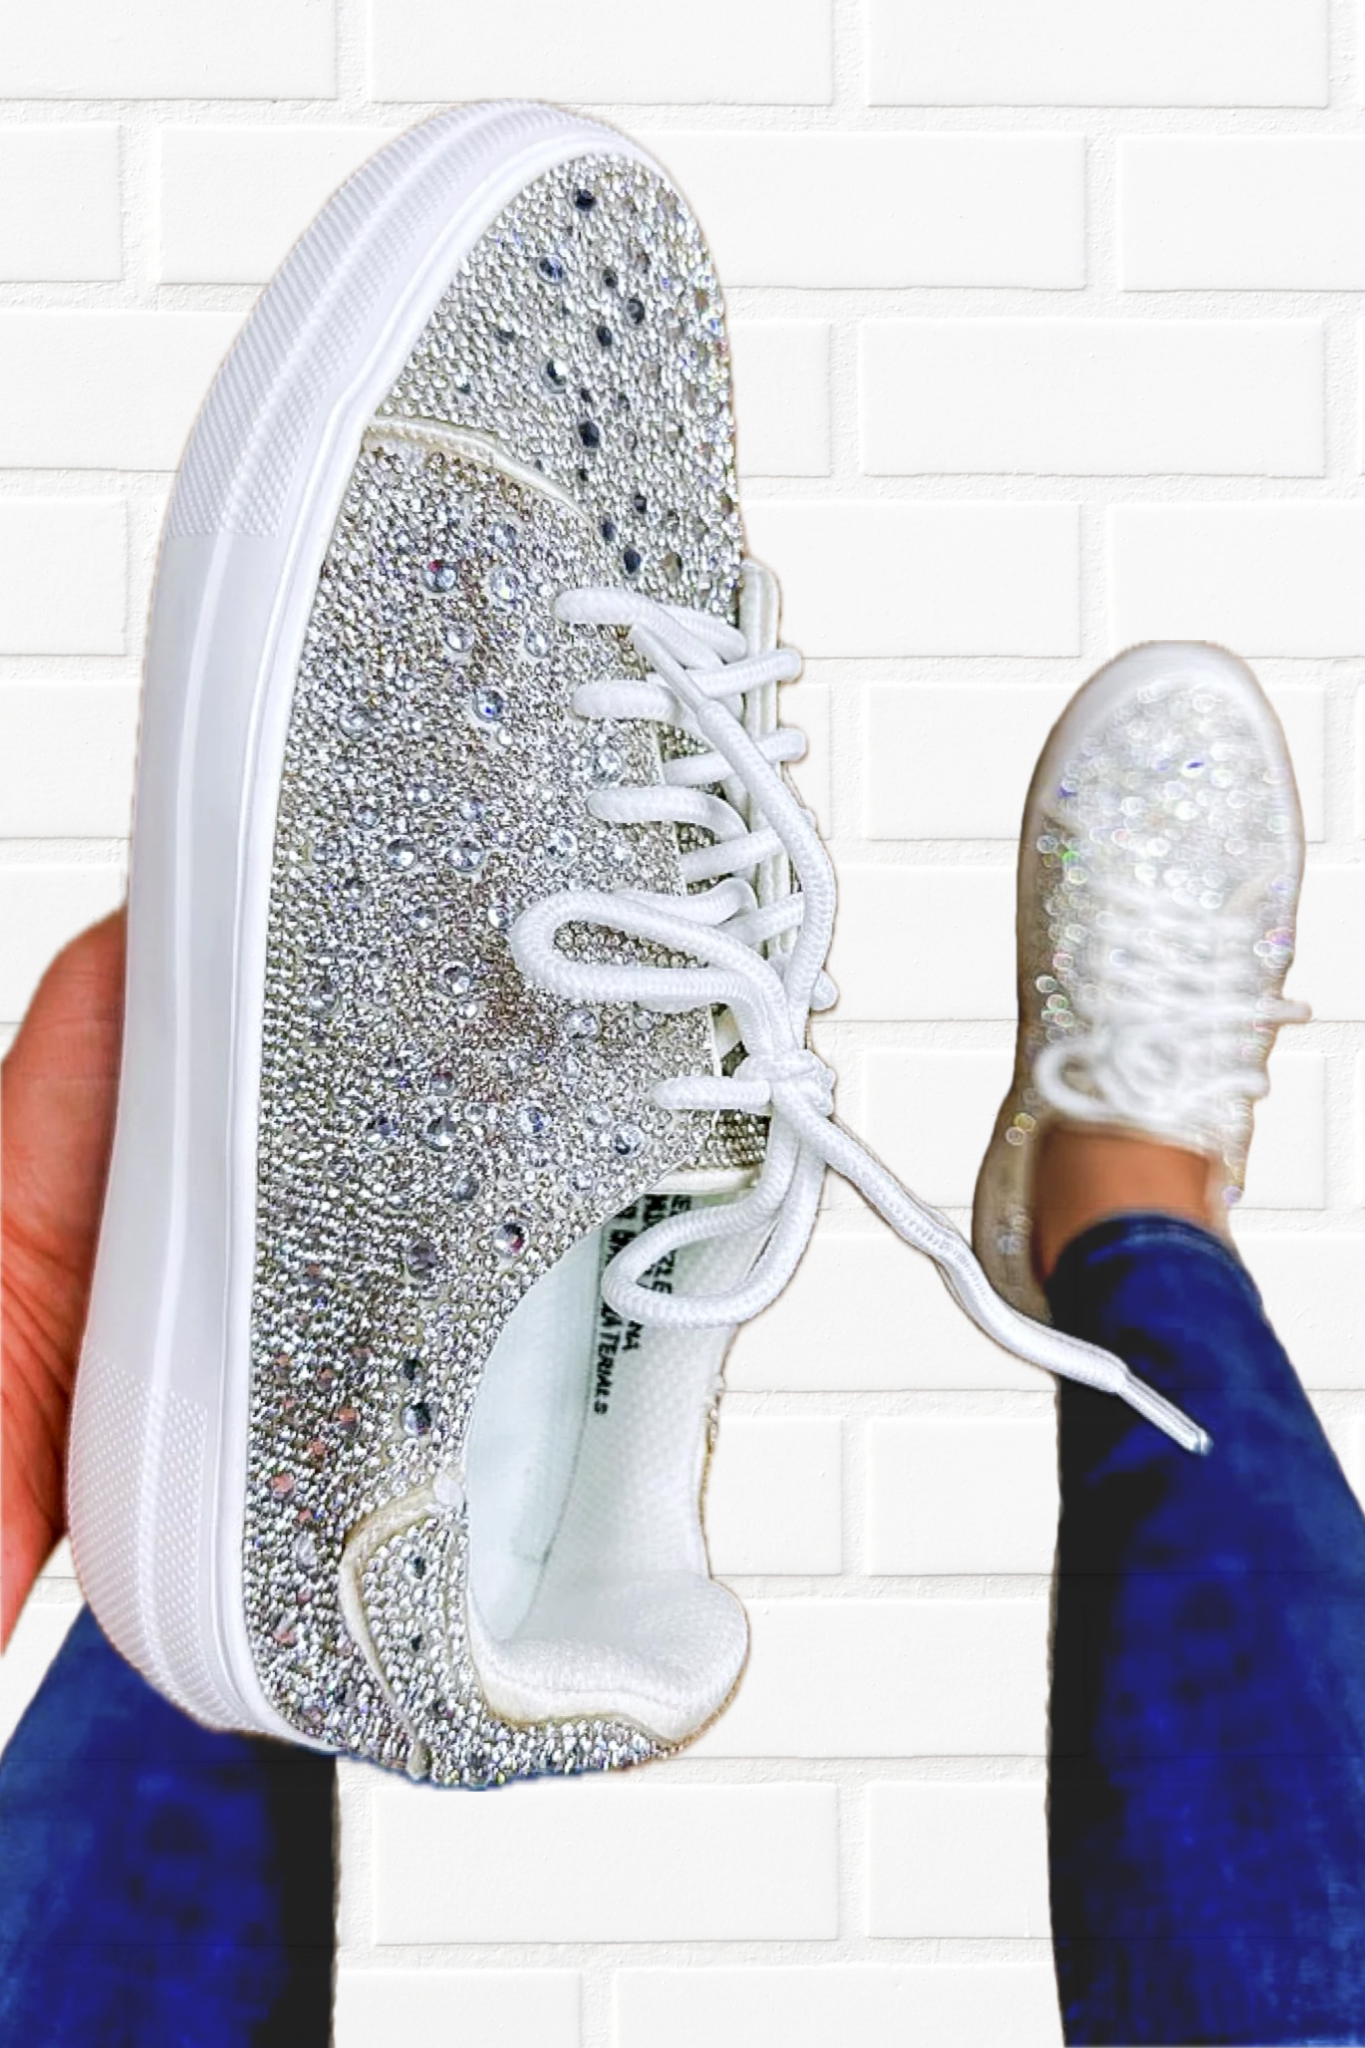 Bedazzle Rhinestone Sneaker in Crystal Clear by Corky's